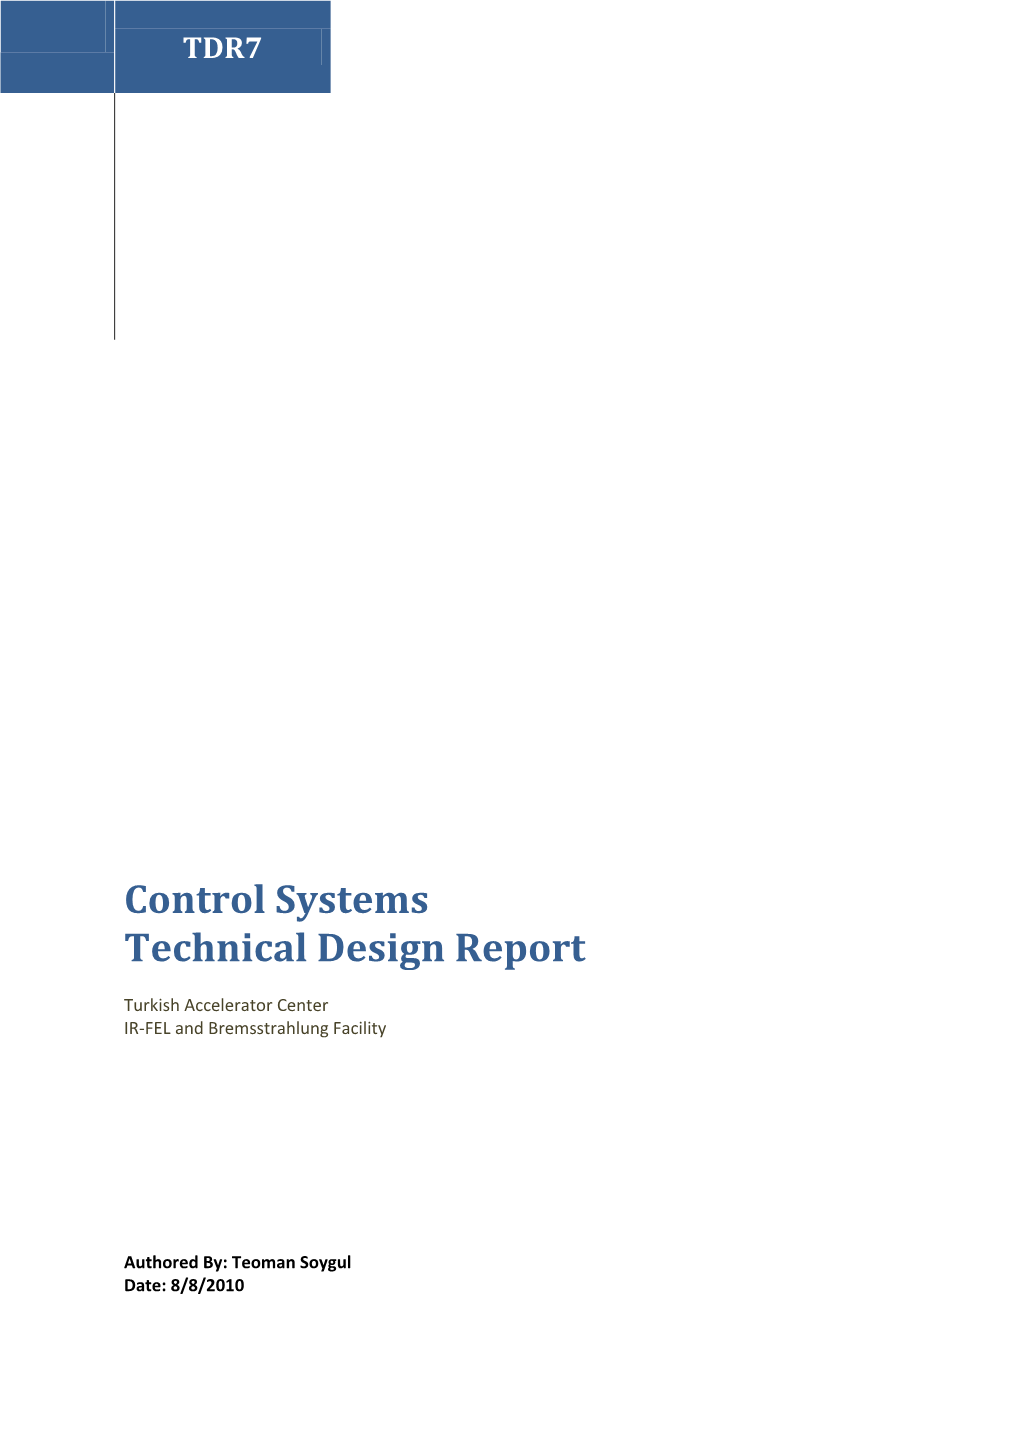 Control Systems Technical Design Report